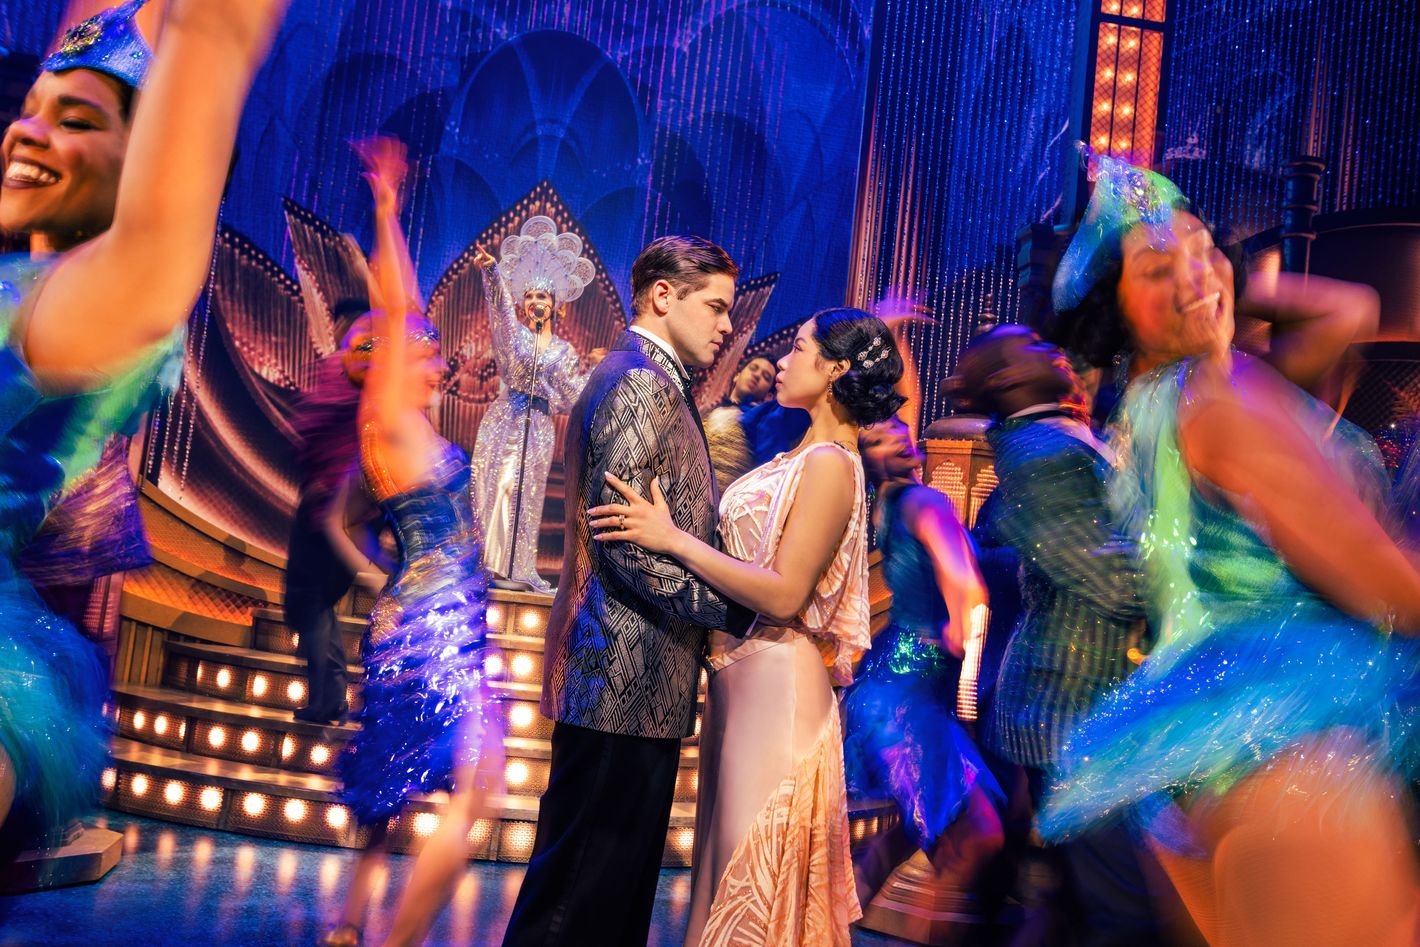 Can You Teach an Old Sport New Tricks? The Great Gatsby on Broadway